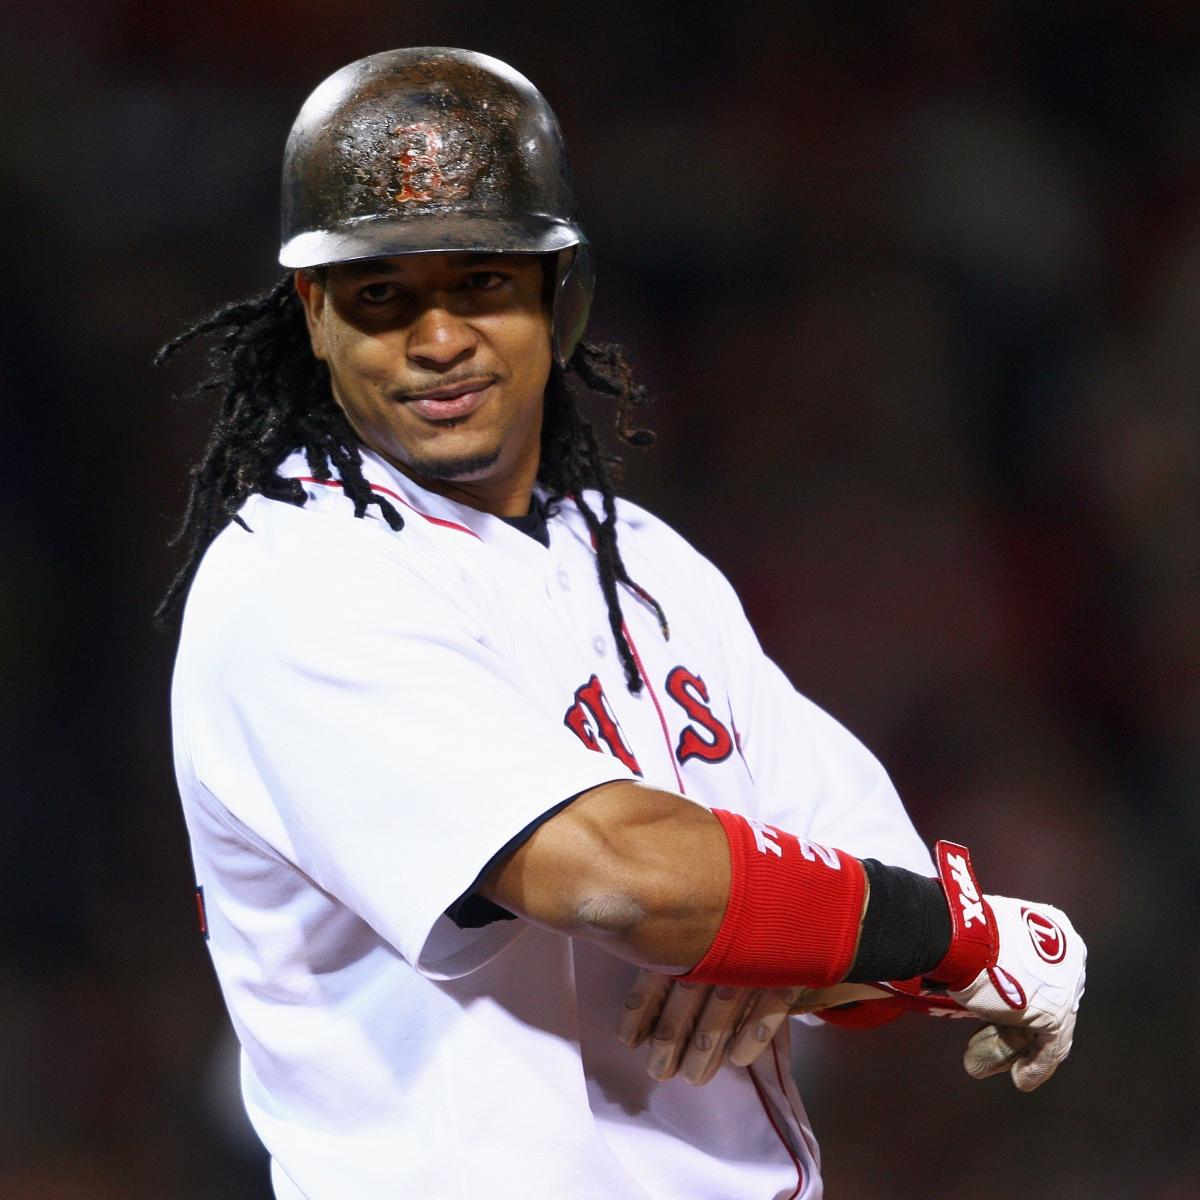 Manny Ramirez Makes His Feelings On Free Agency Very Clear - The